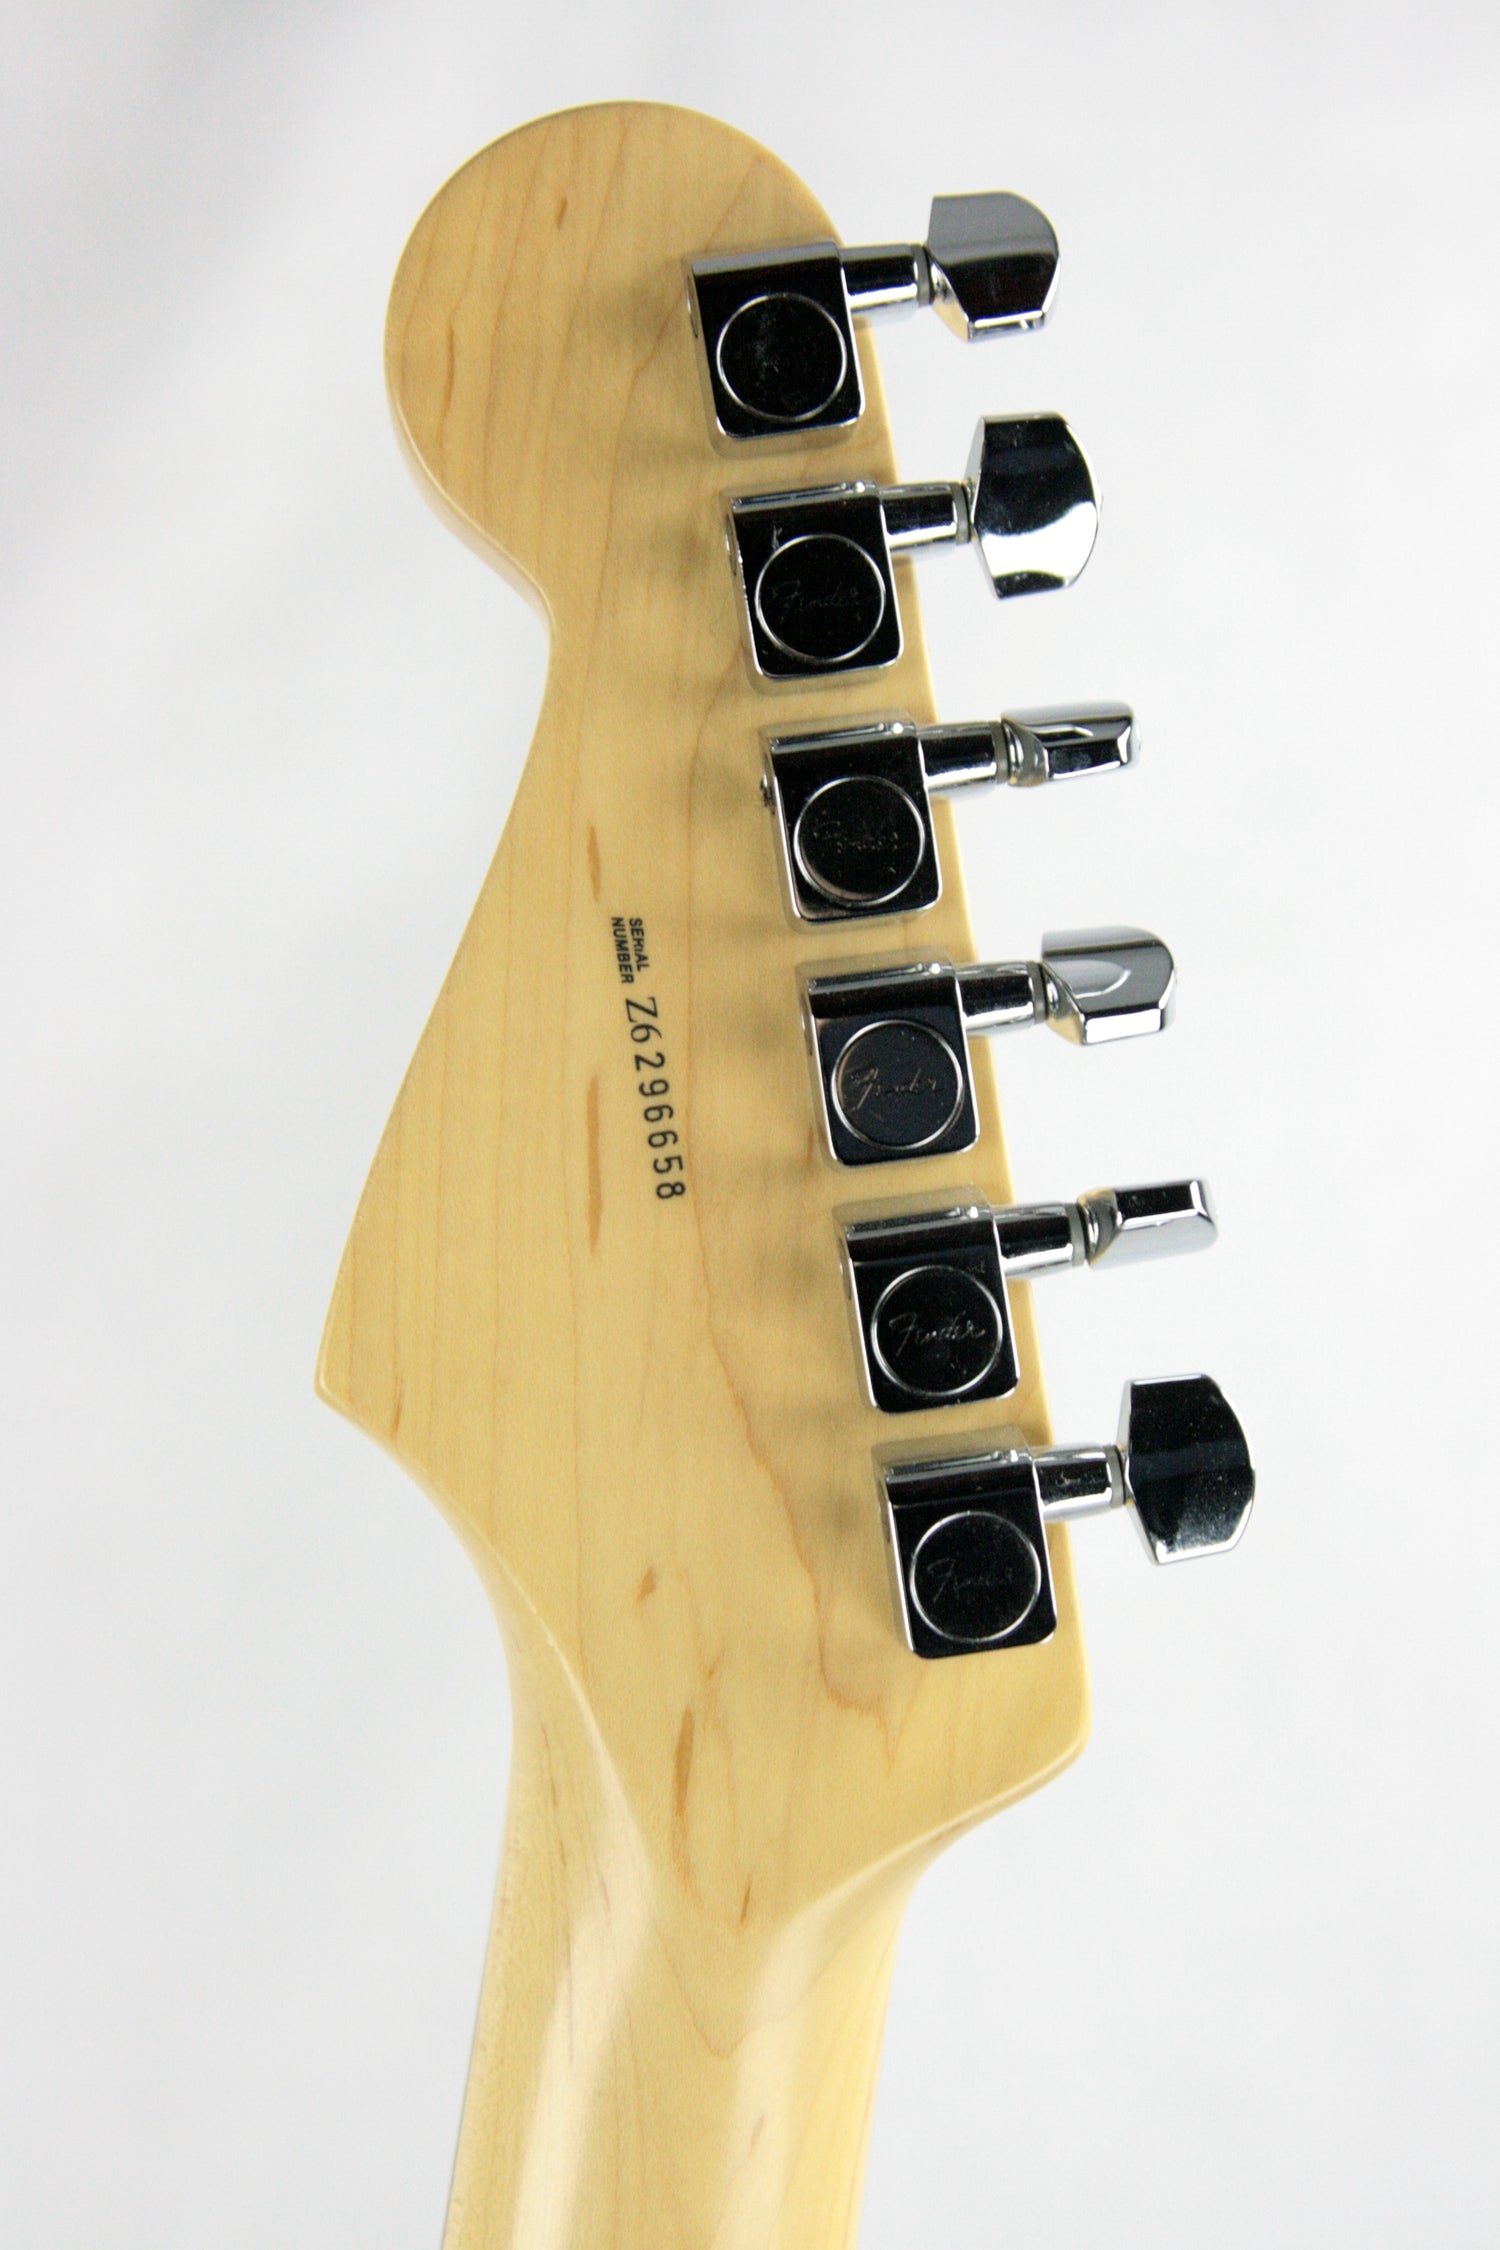 Fender back of the headstock serial number example